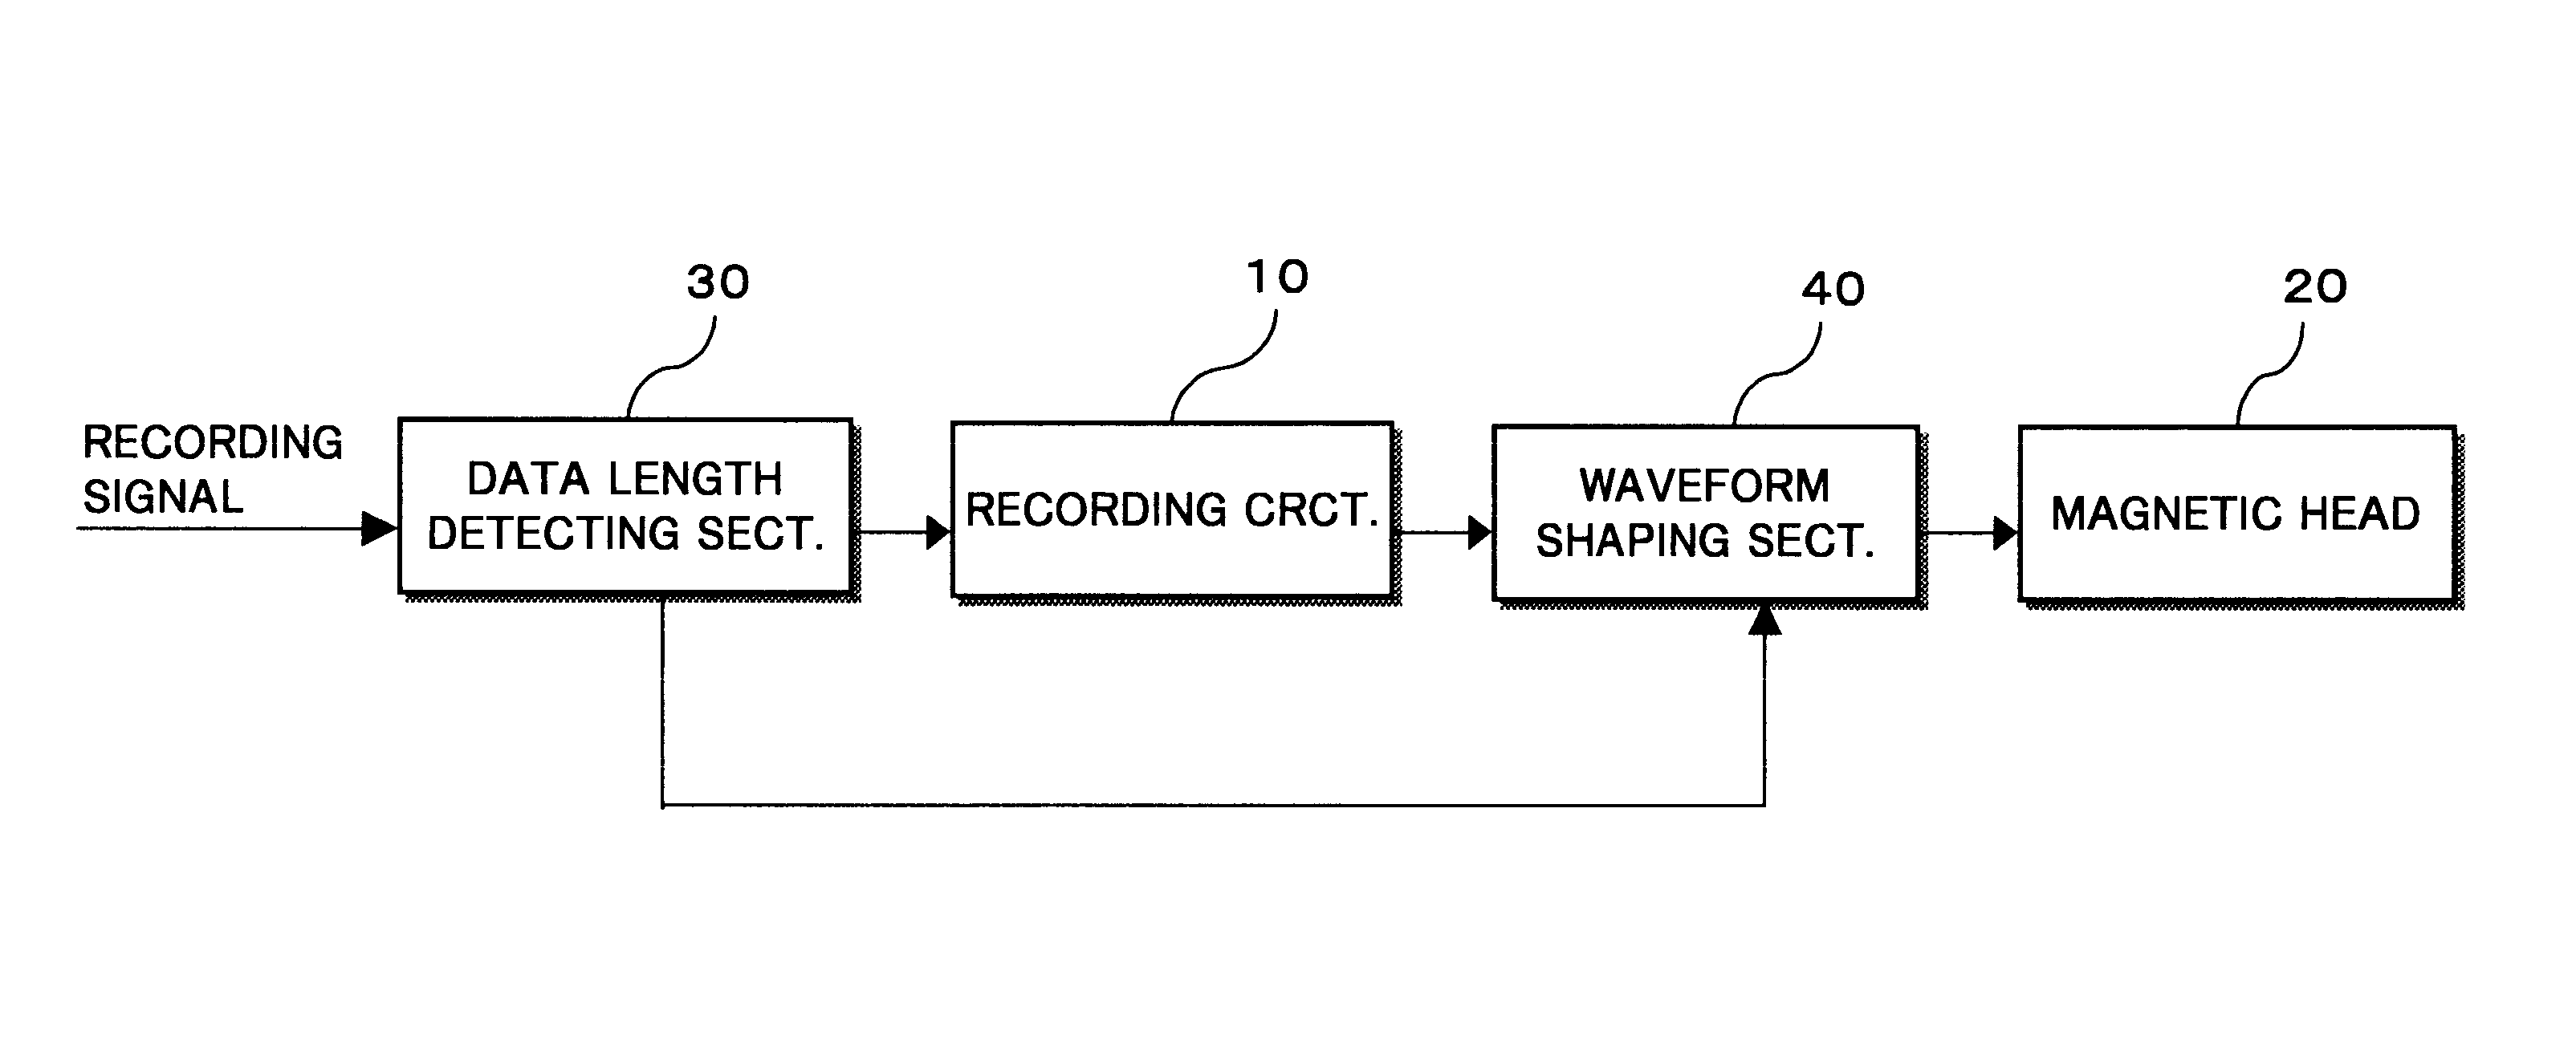 Magnetic recording apparatus and integrated circuit for magnetic recording with a shaped waveform